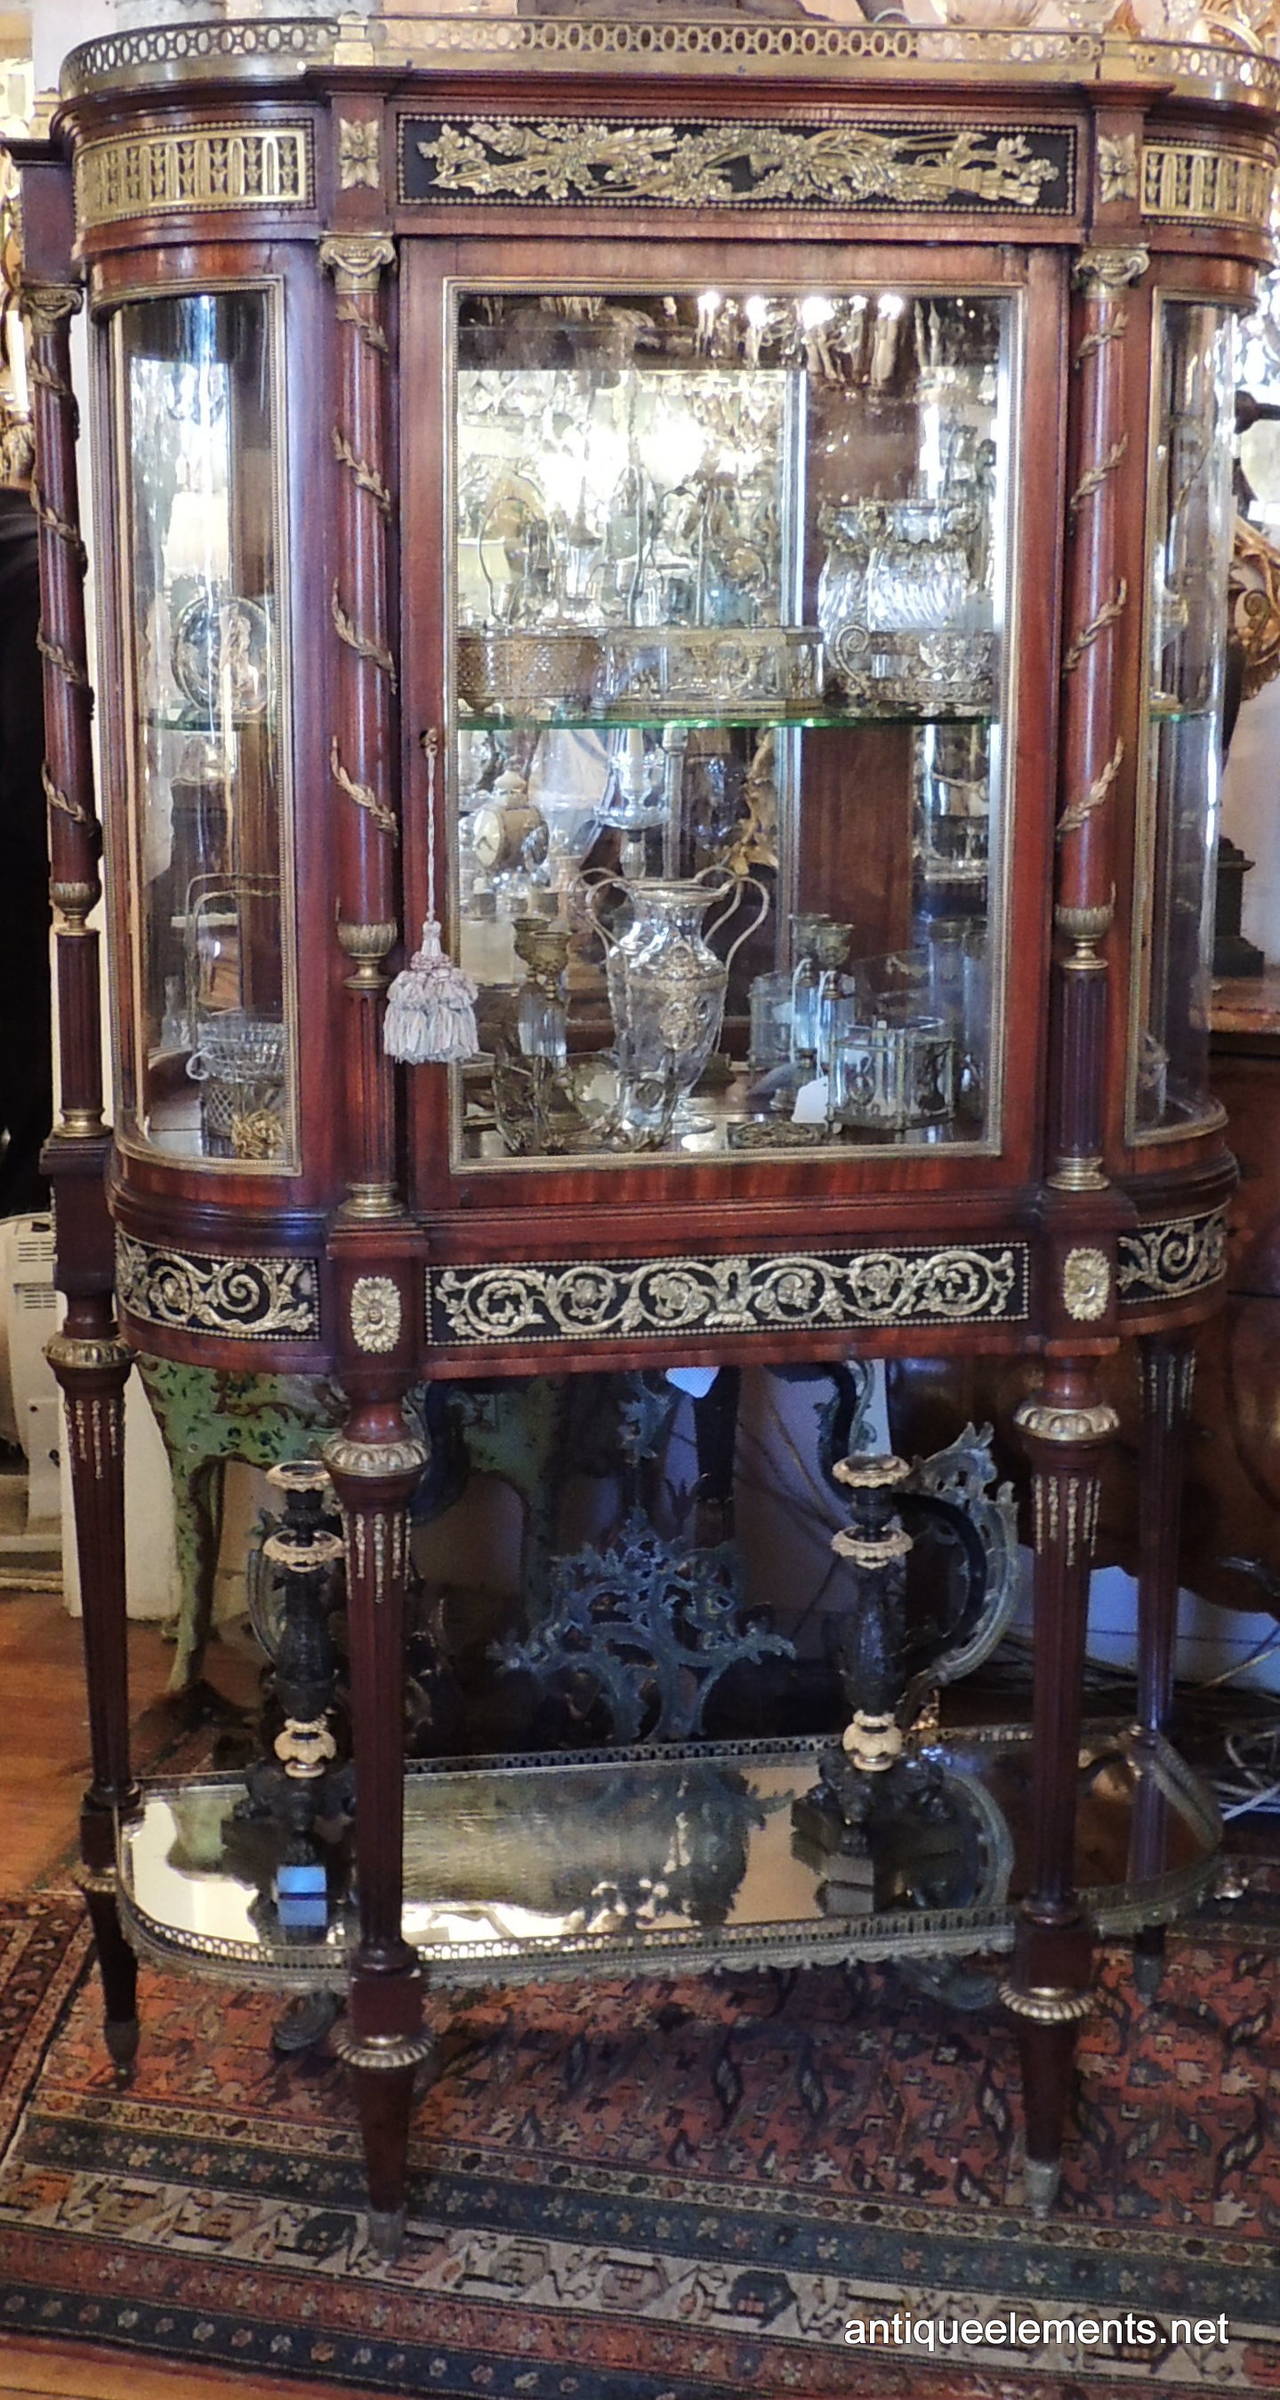 This beautiful Classic is an early 1900s French rosewood vitrine with beautiful bronze ormolu-mounted details. There are two glass shelves in the top portion with a wonderful mirrored back. The side glasses are original and curved, set off with the